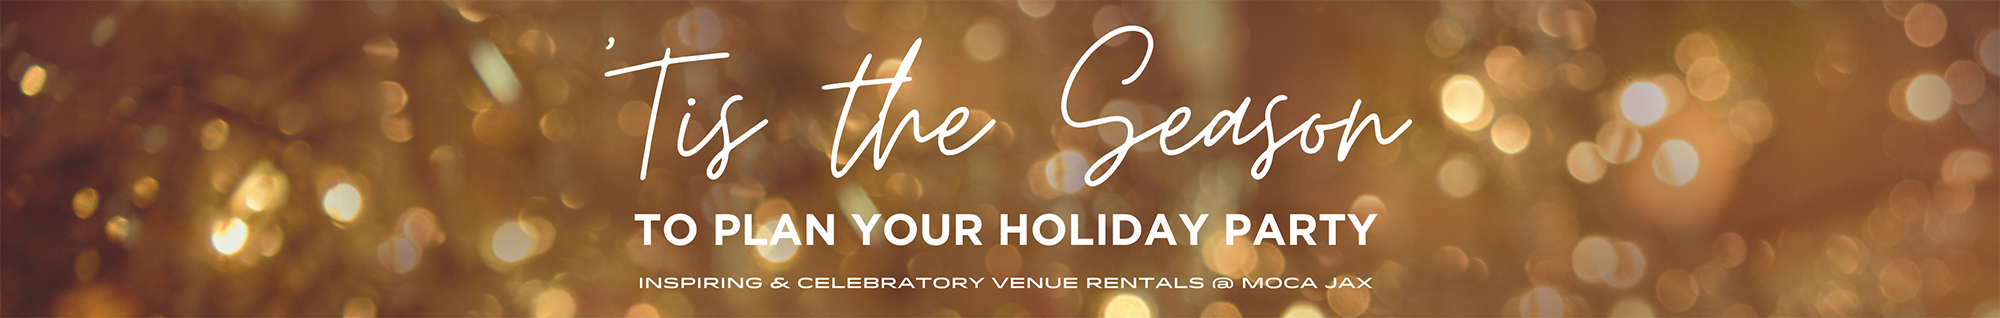 gold sparkle background with the text; 'Tis the Season to Plan Your Holiday Party - Inspiring and Celebratory Venue Rentals at MOCA Jax